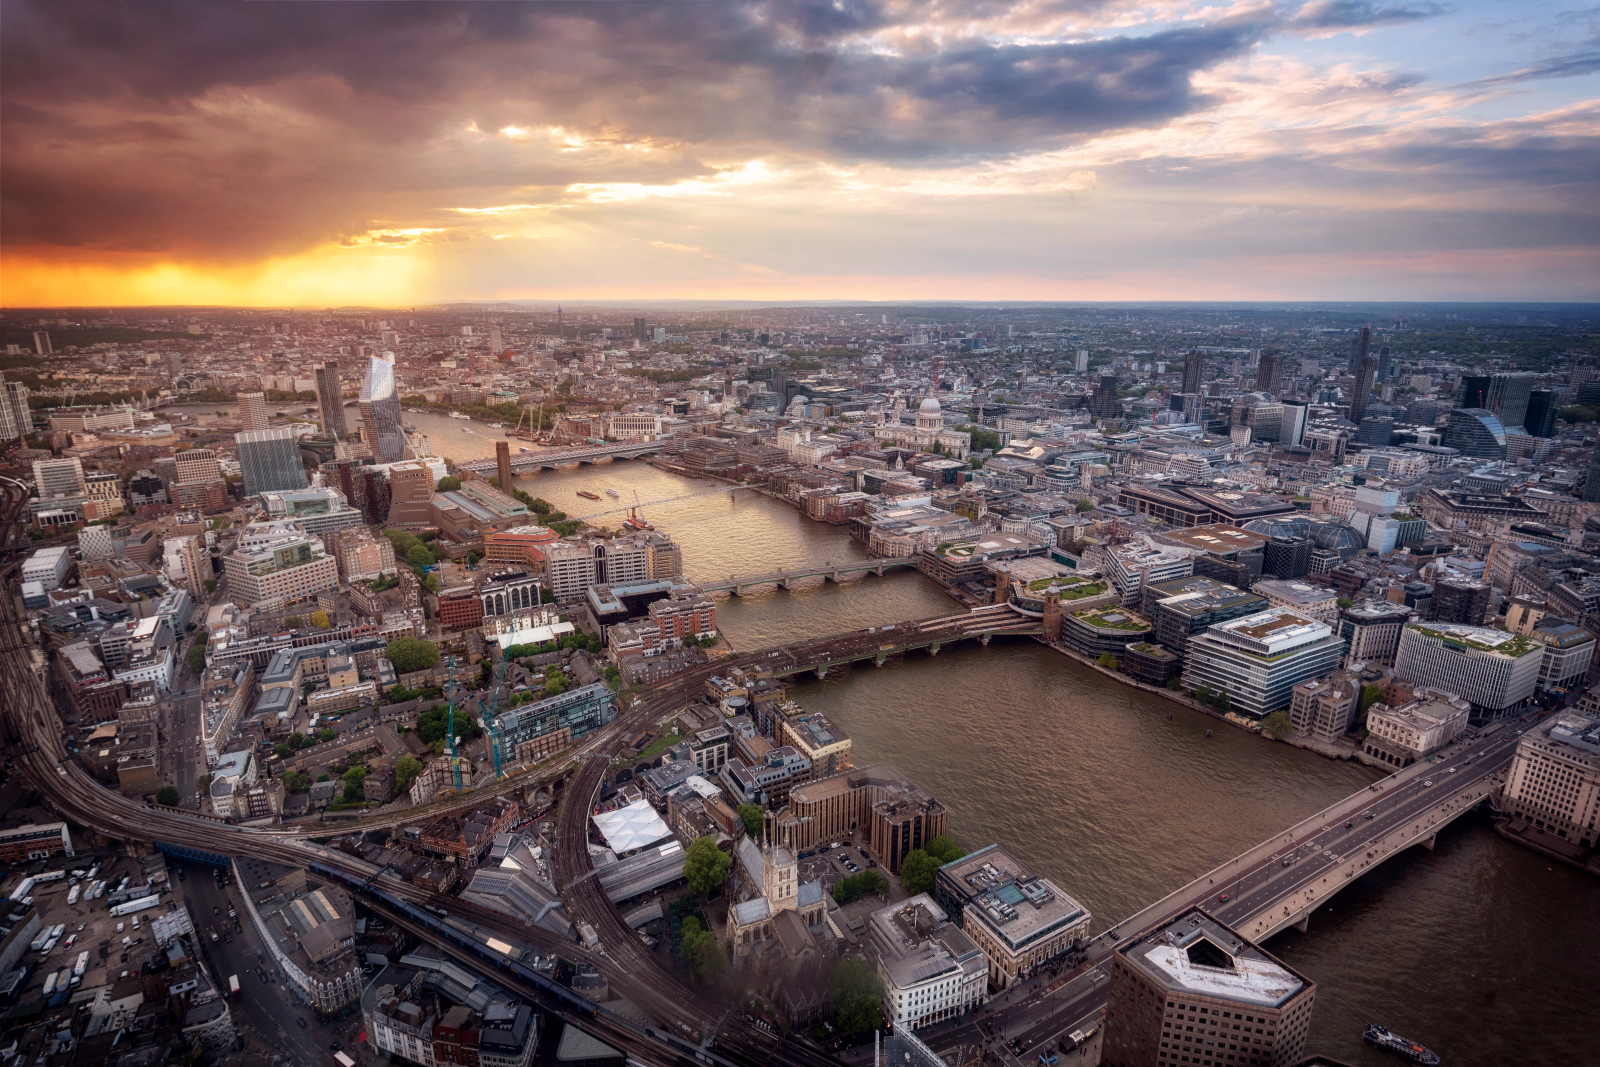 Aerial photo of London showing the river Thames and some key landmarks